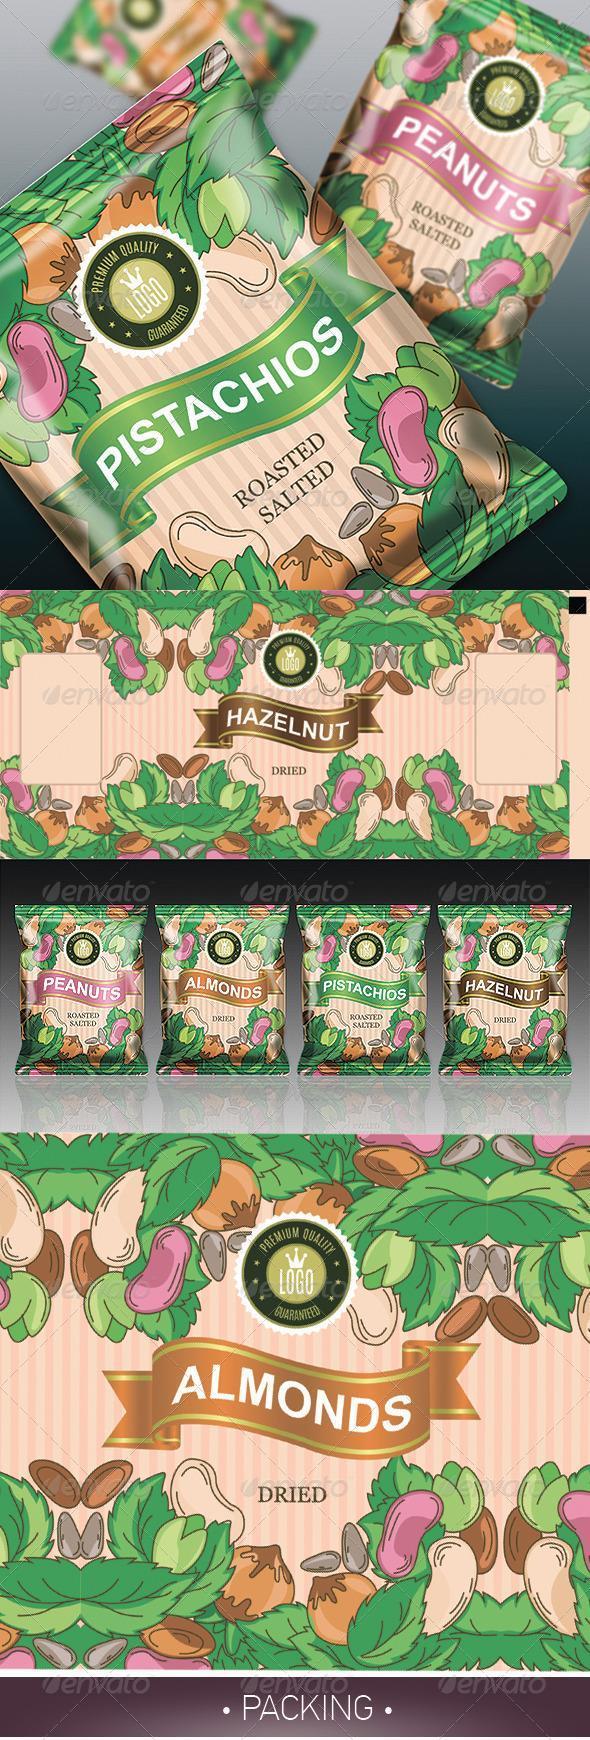 Nuts Packaging PSD